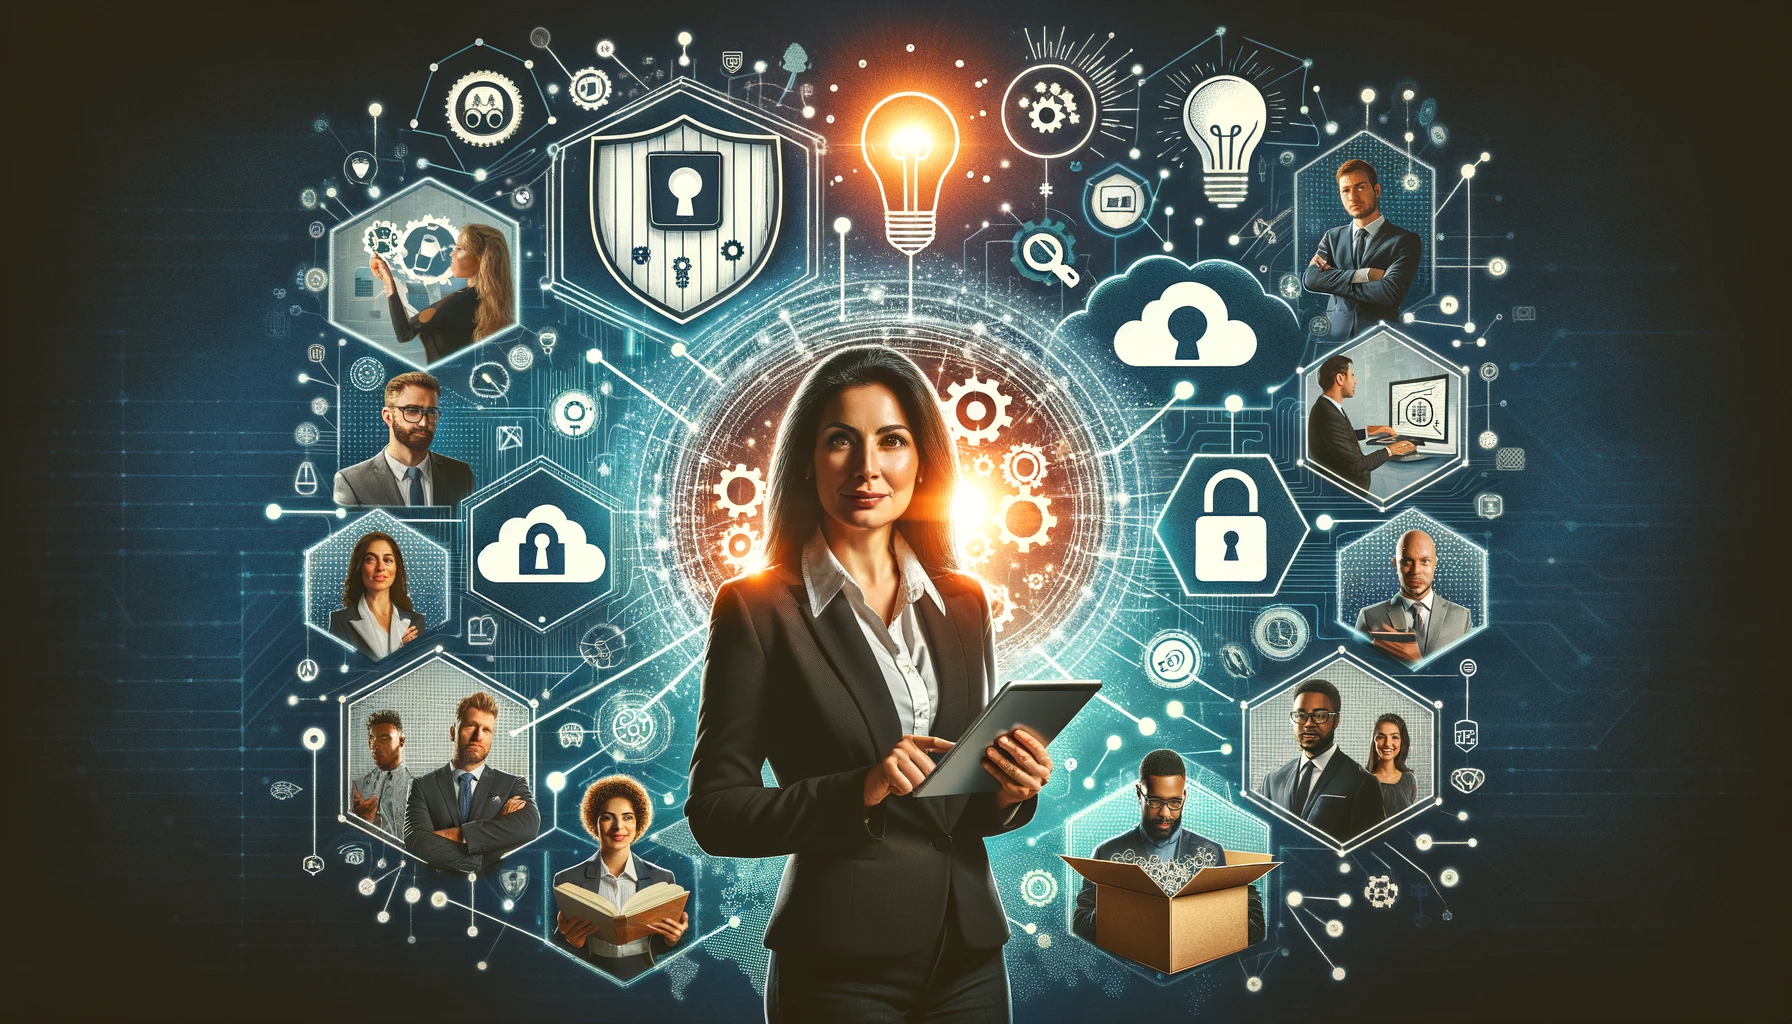 Small business owner with digital tablet surrounded by symbols of IT challenges and solutions, including cybersecurity shield, cloud services, knowledge book, toolbox, and diverse IT professionals.